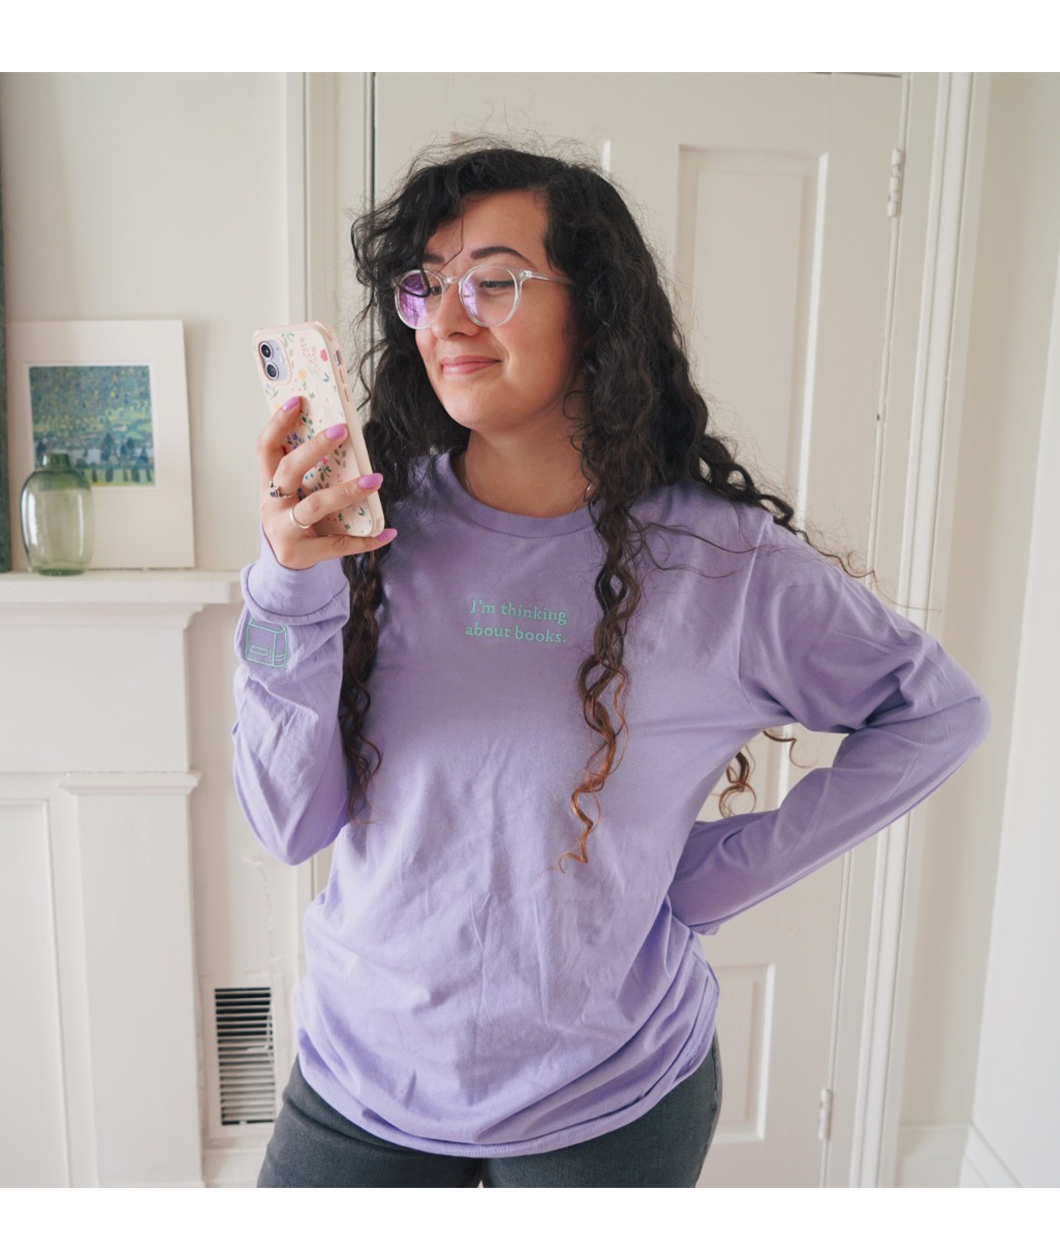 Ariel Bissett modeling a lavender long sleeve shirt with writing on the front center.